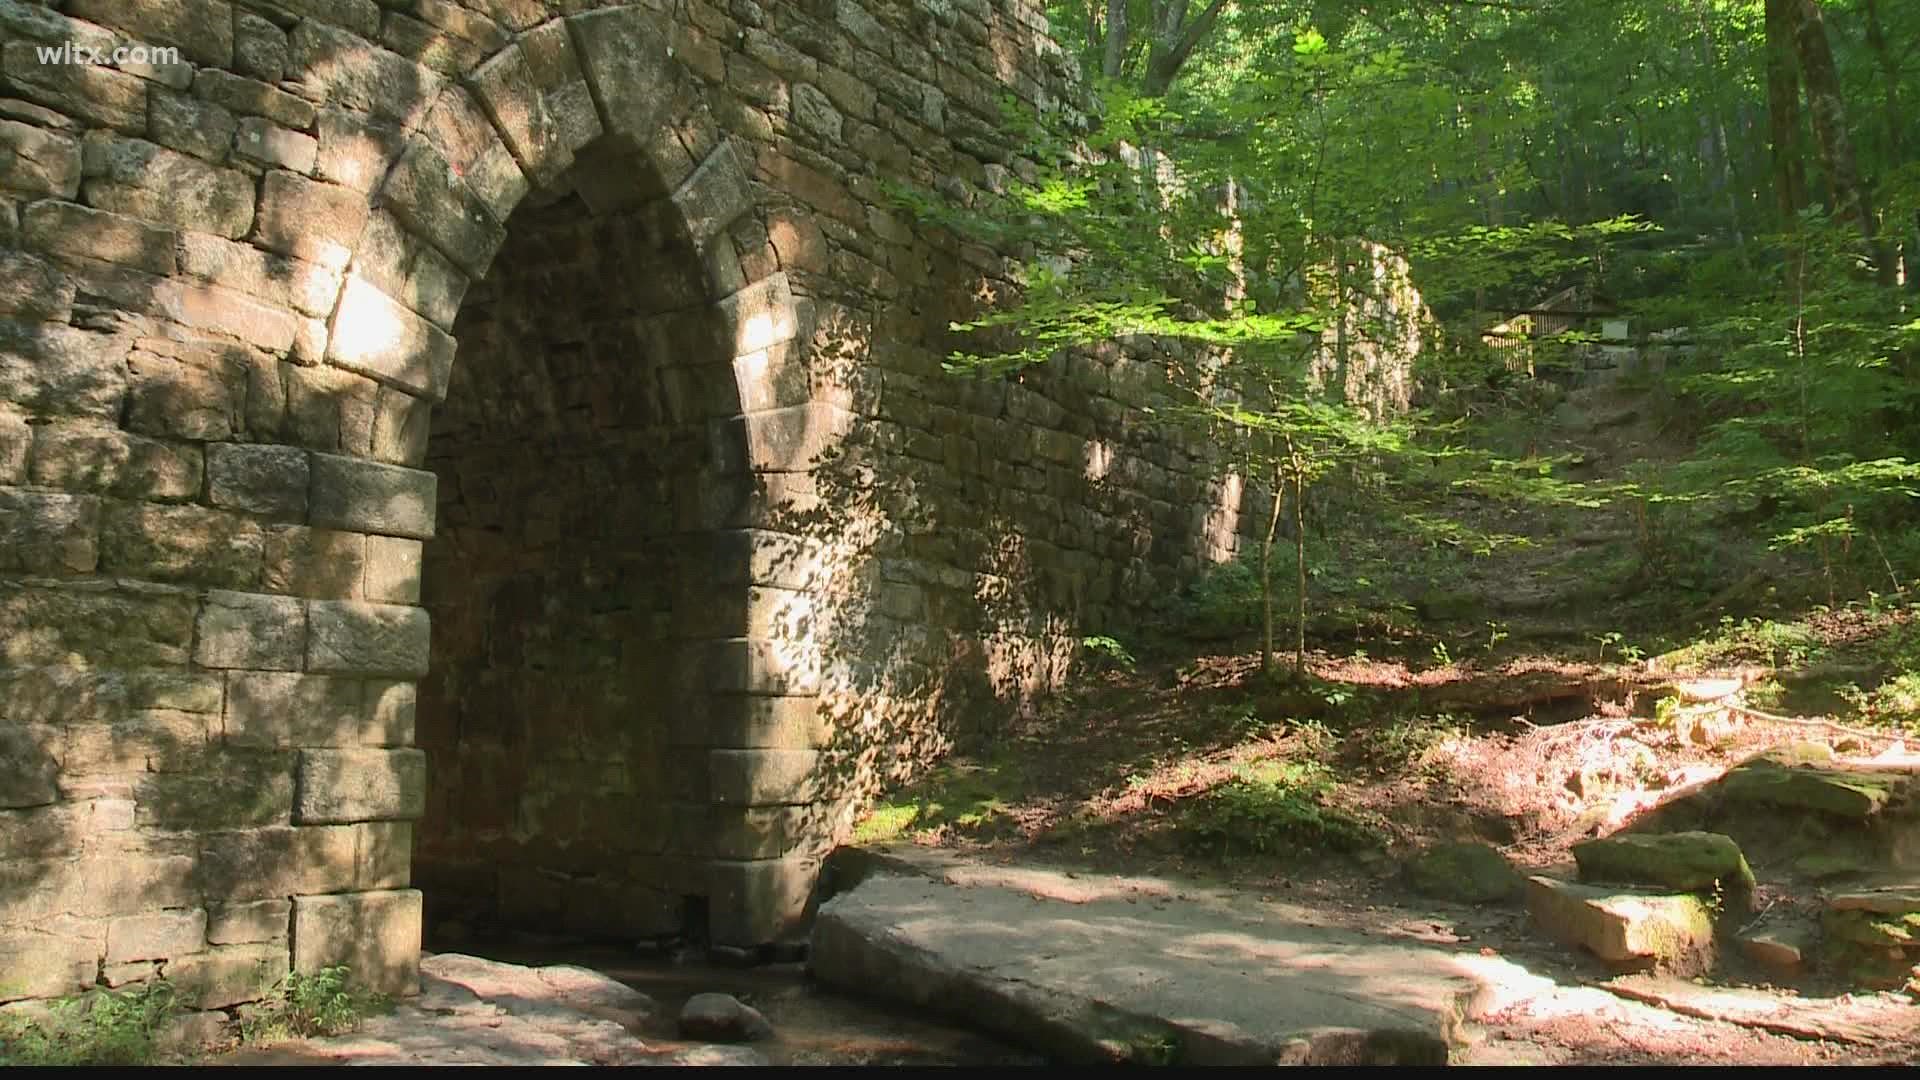 Poinsett Bridge, a stone structure, is believed to be the oldest such structure in the entire Southeastern United States.